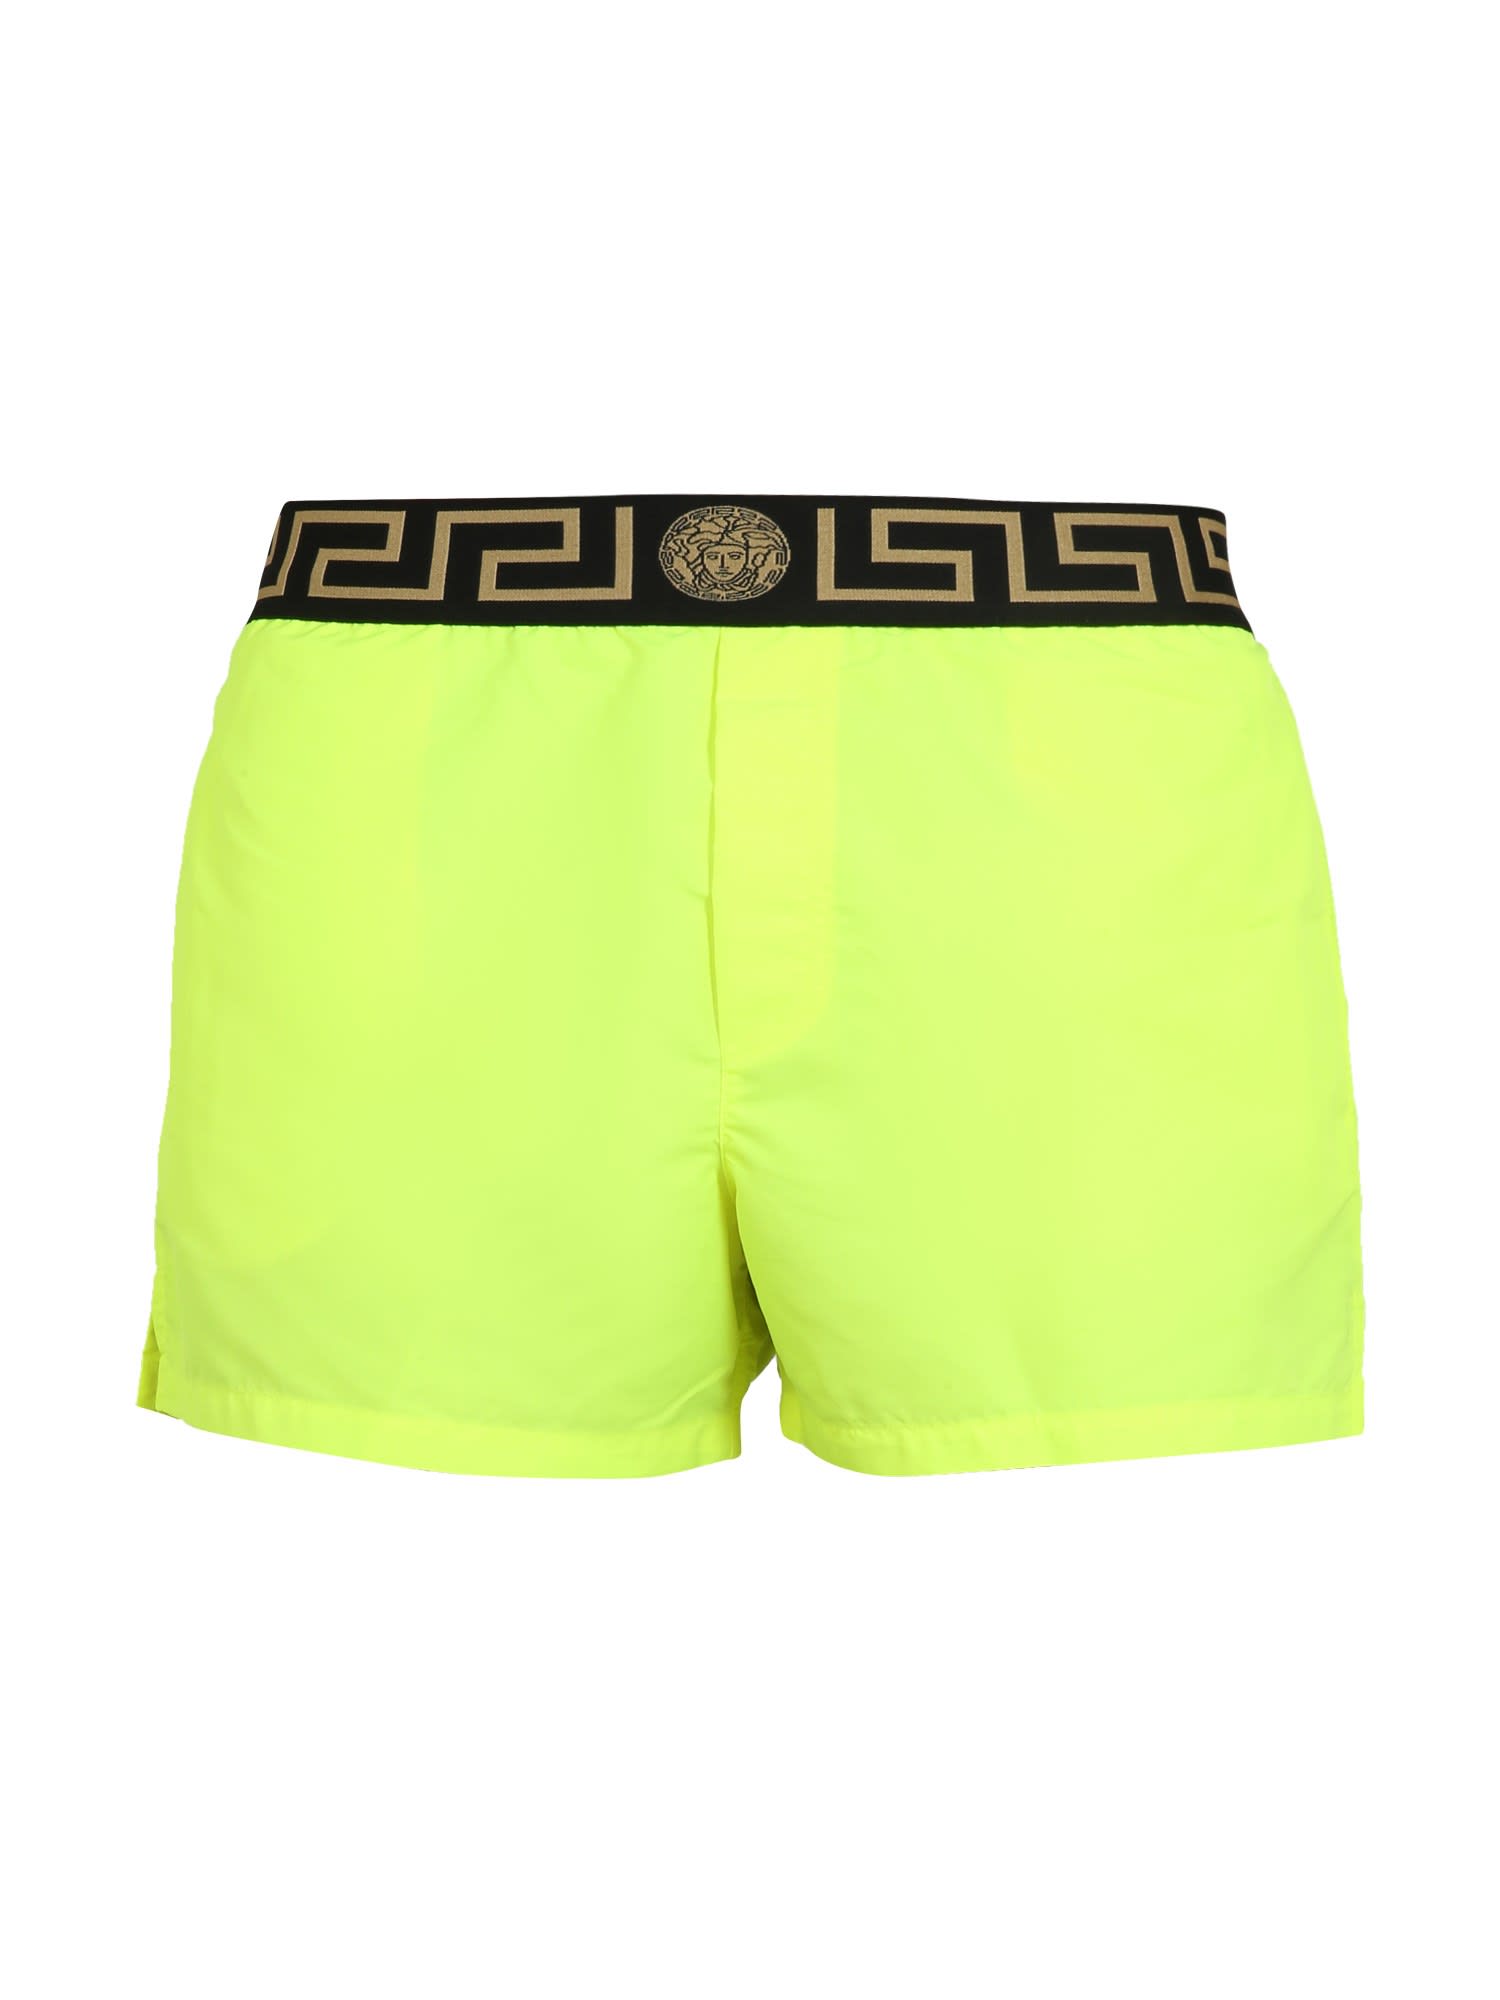 Versace Boxer Swimsuit With Greek Border